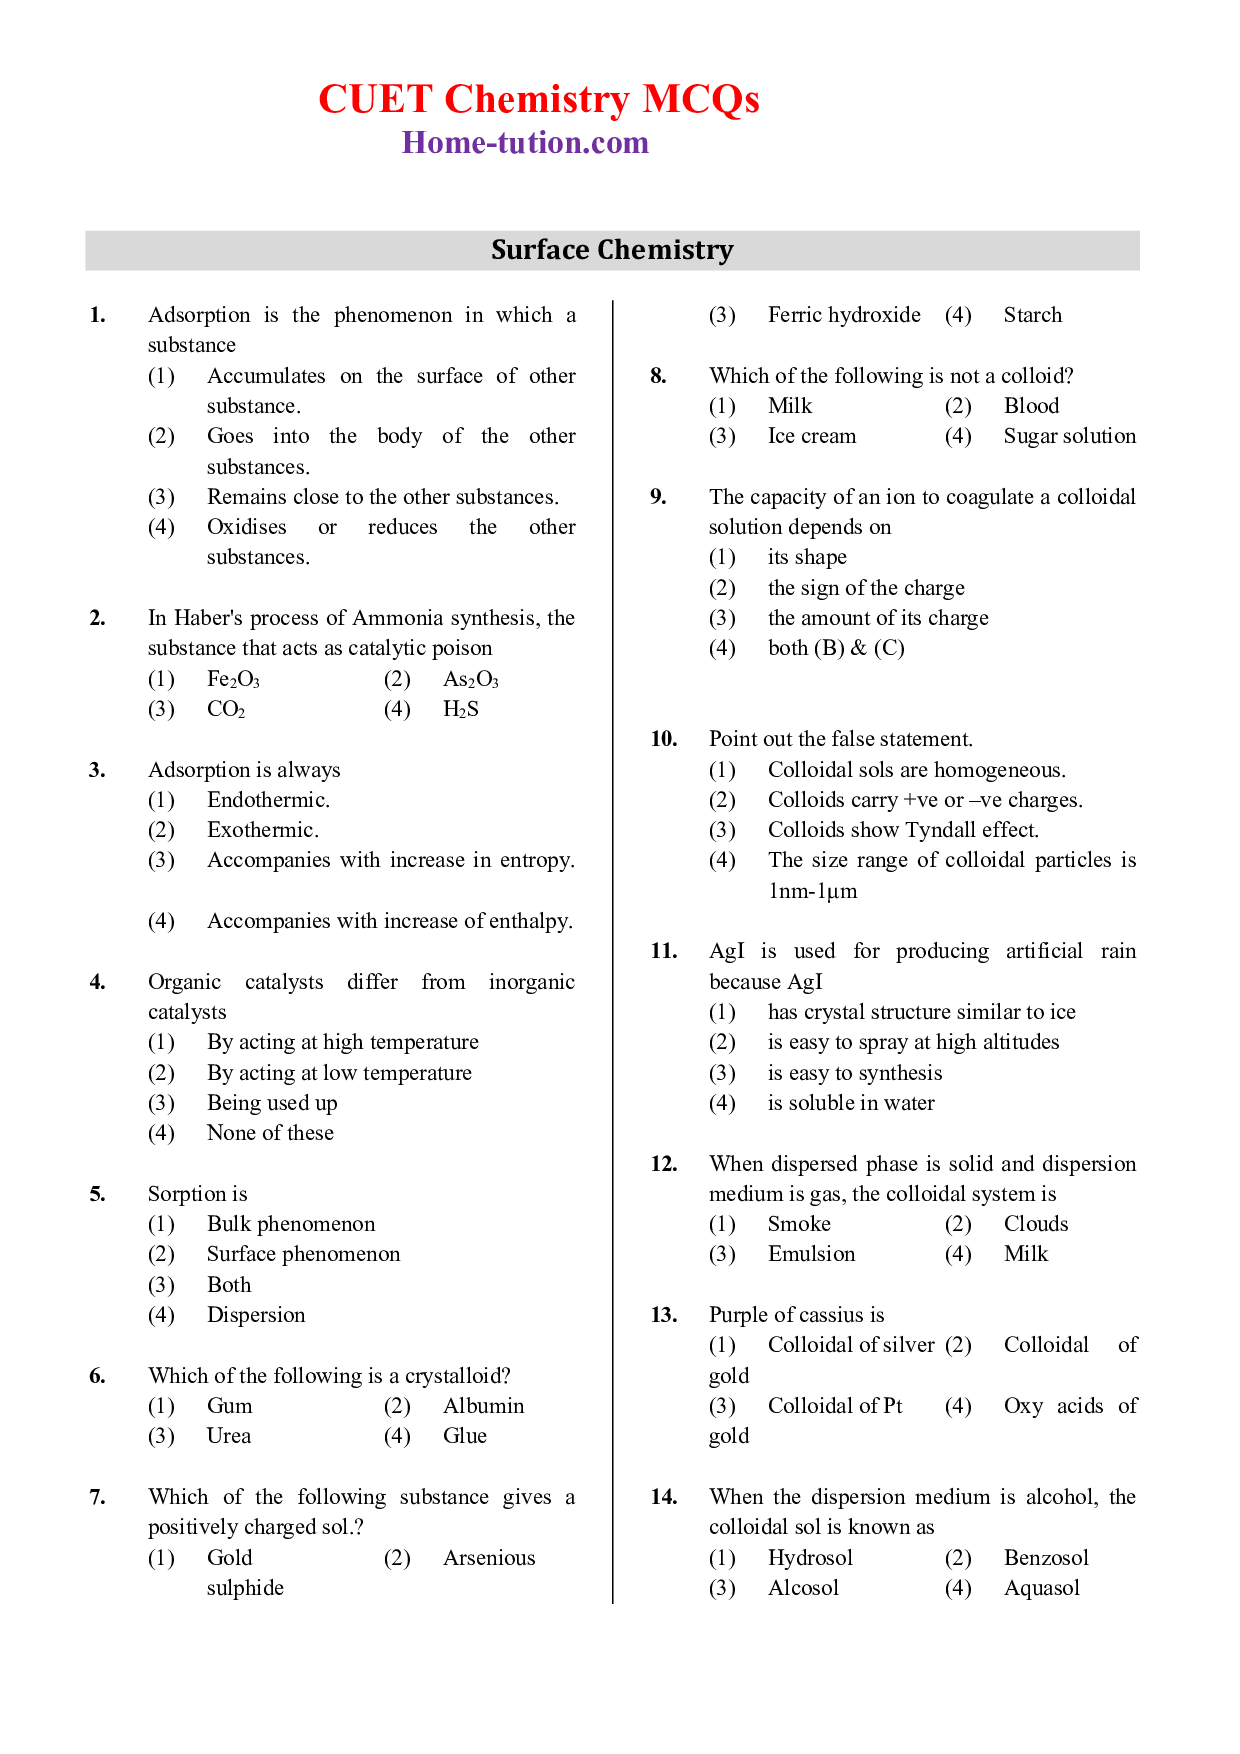 CUET MCQ Questions For Chapter-05 Surface Chemistry